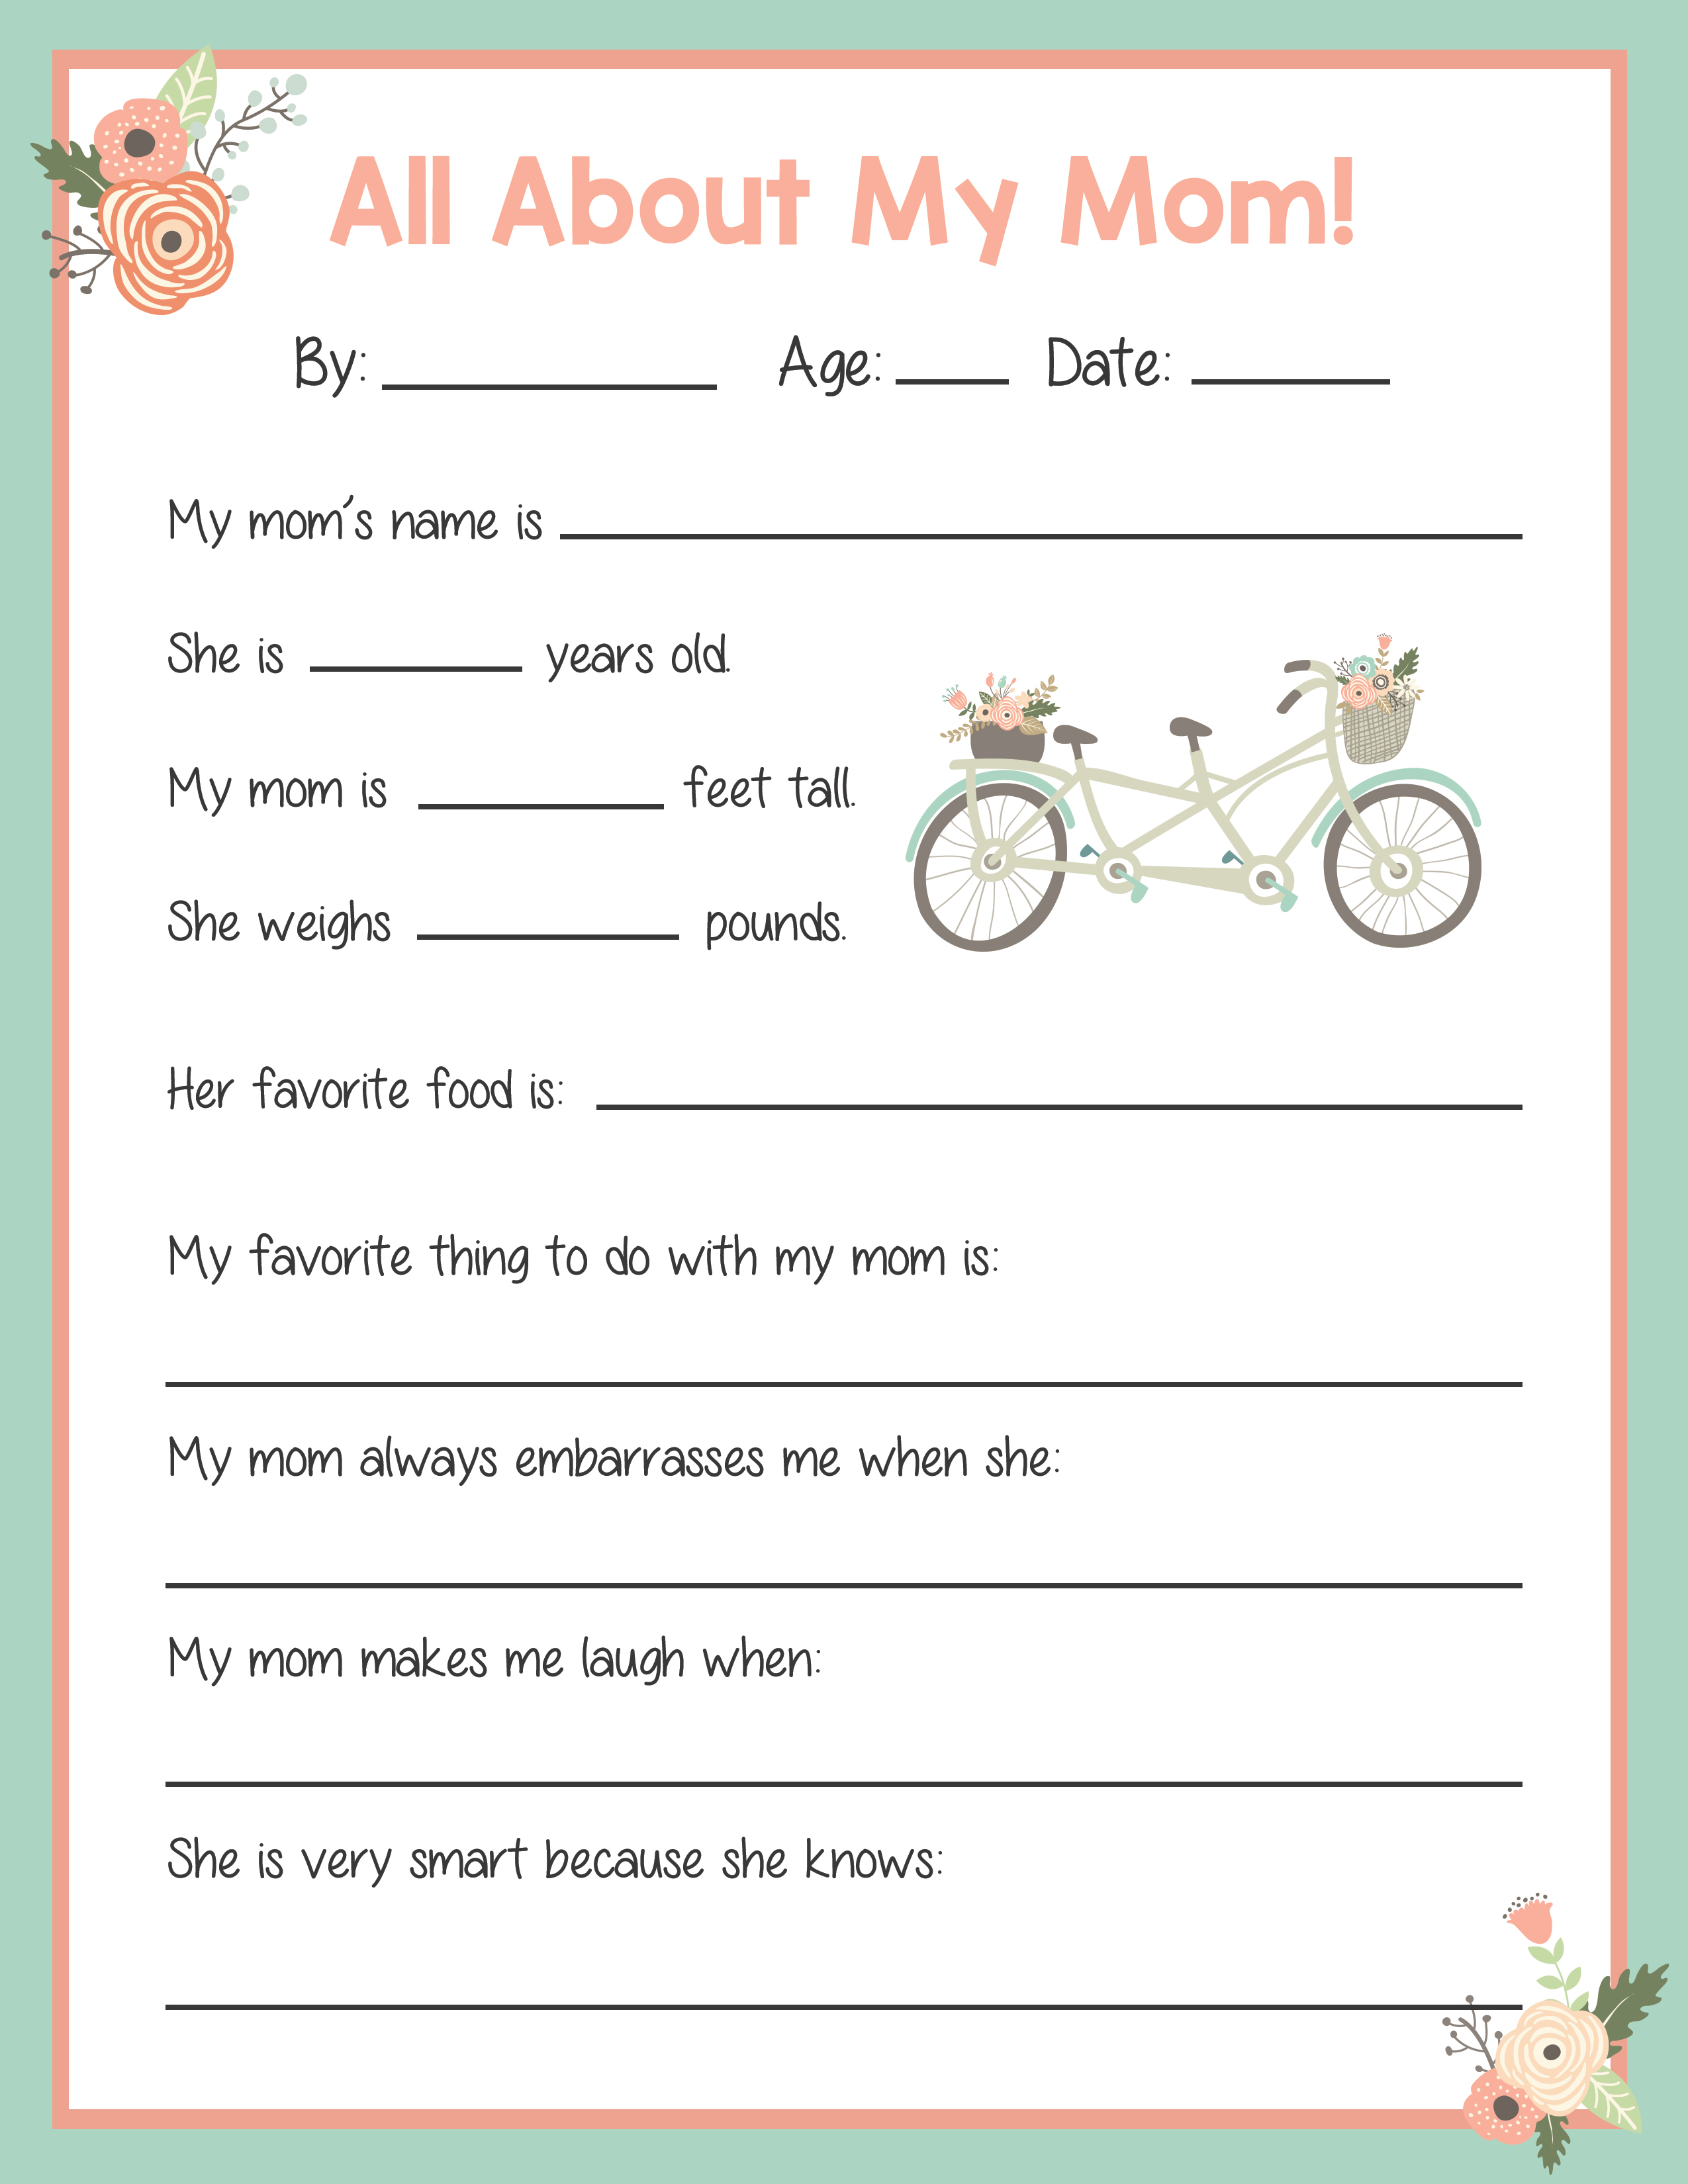 mother's day questionnaire printable Hunter Blog